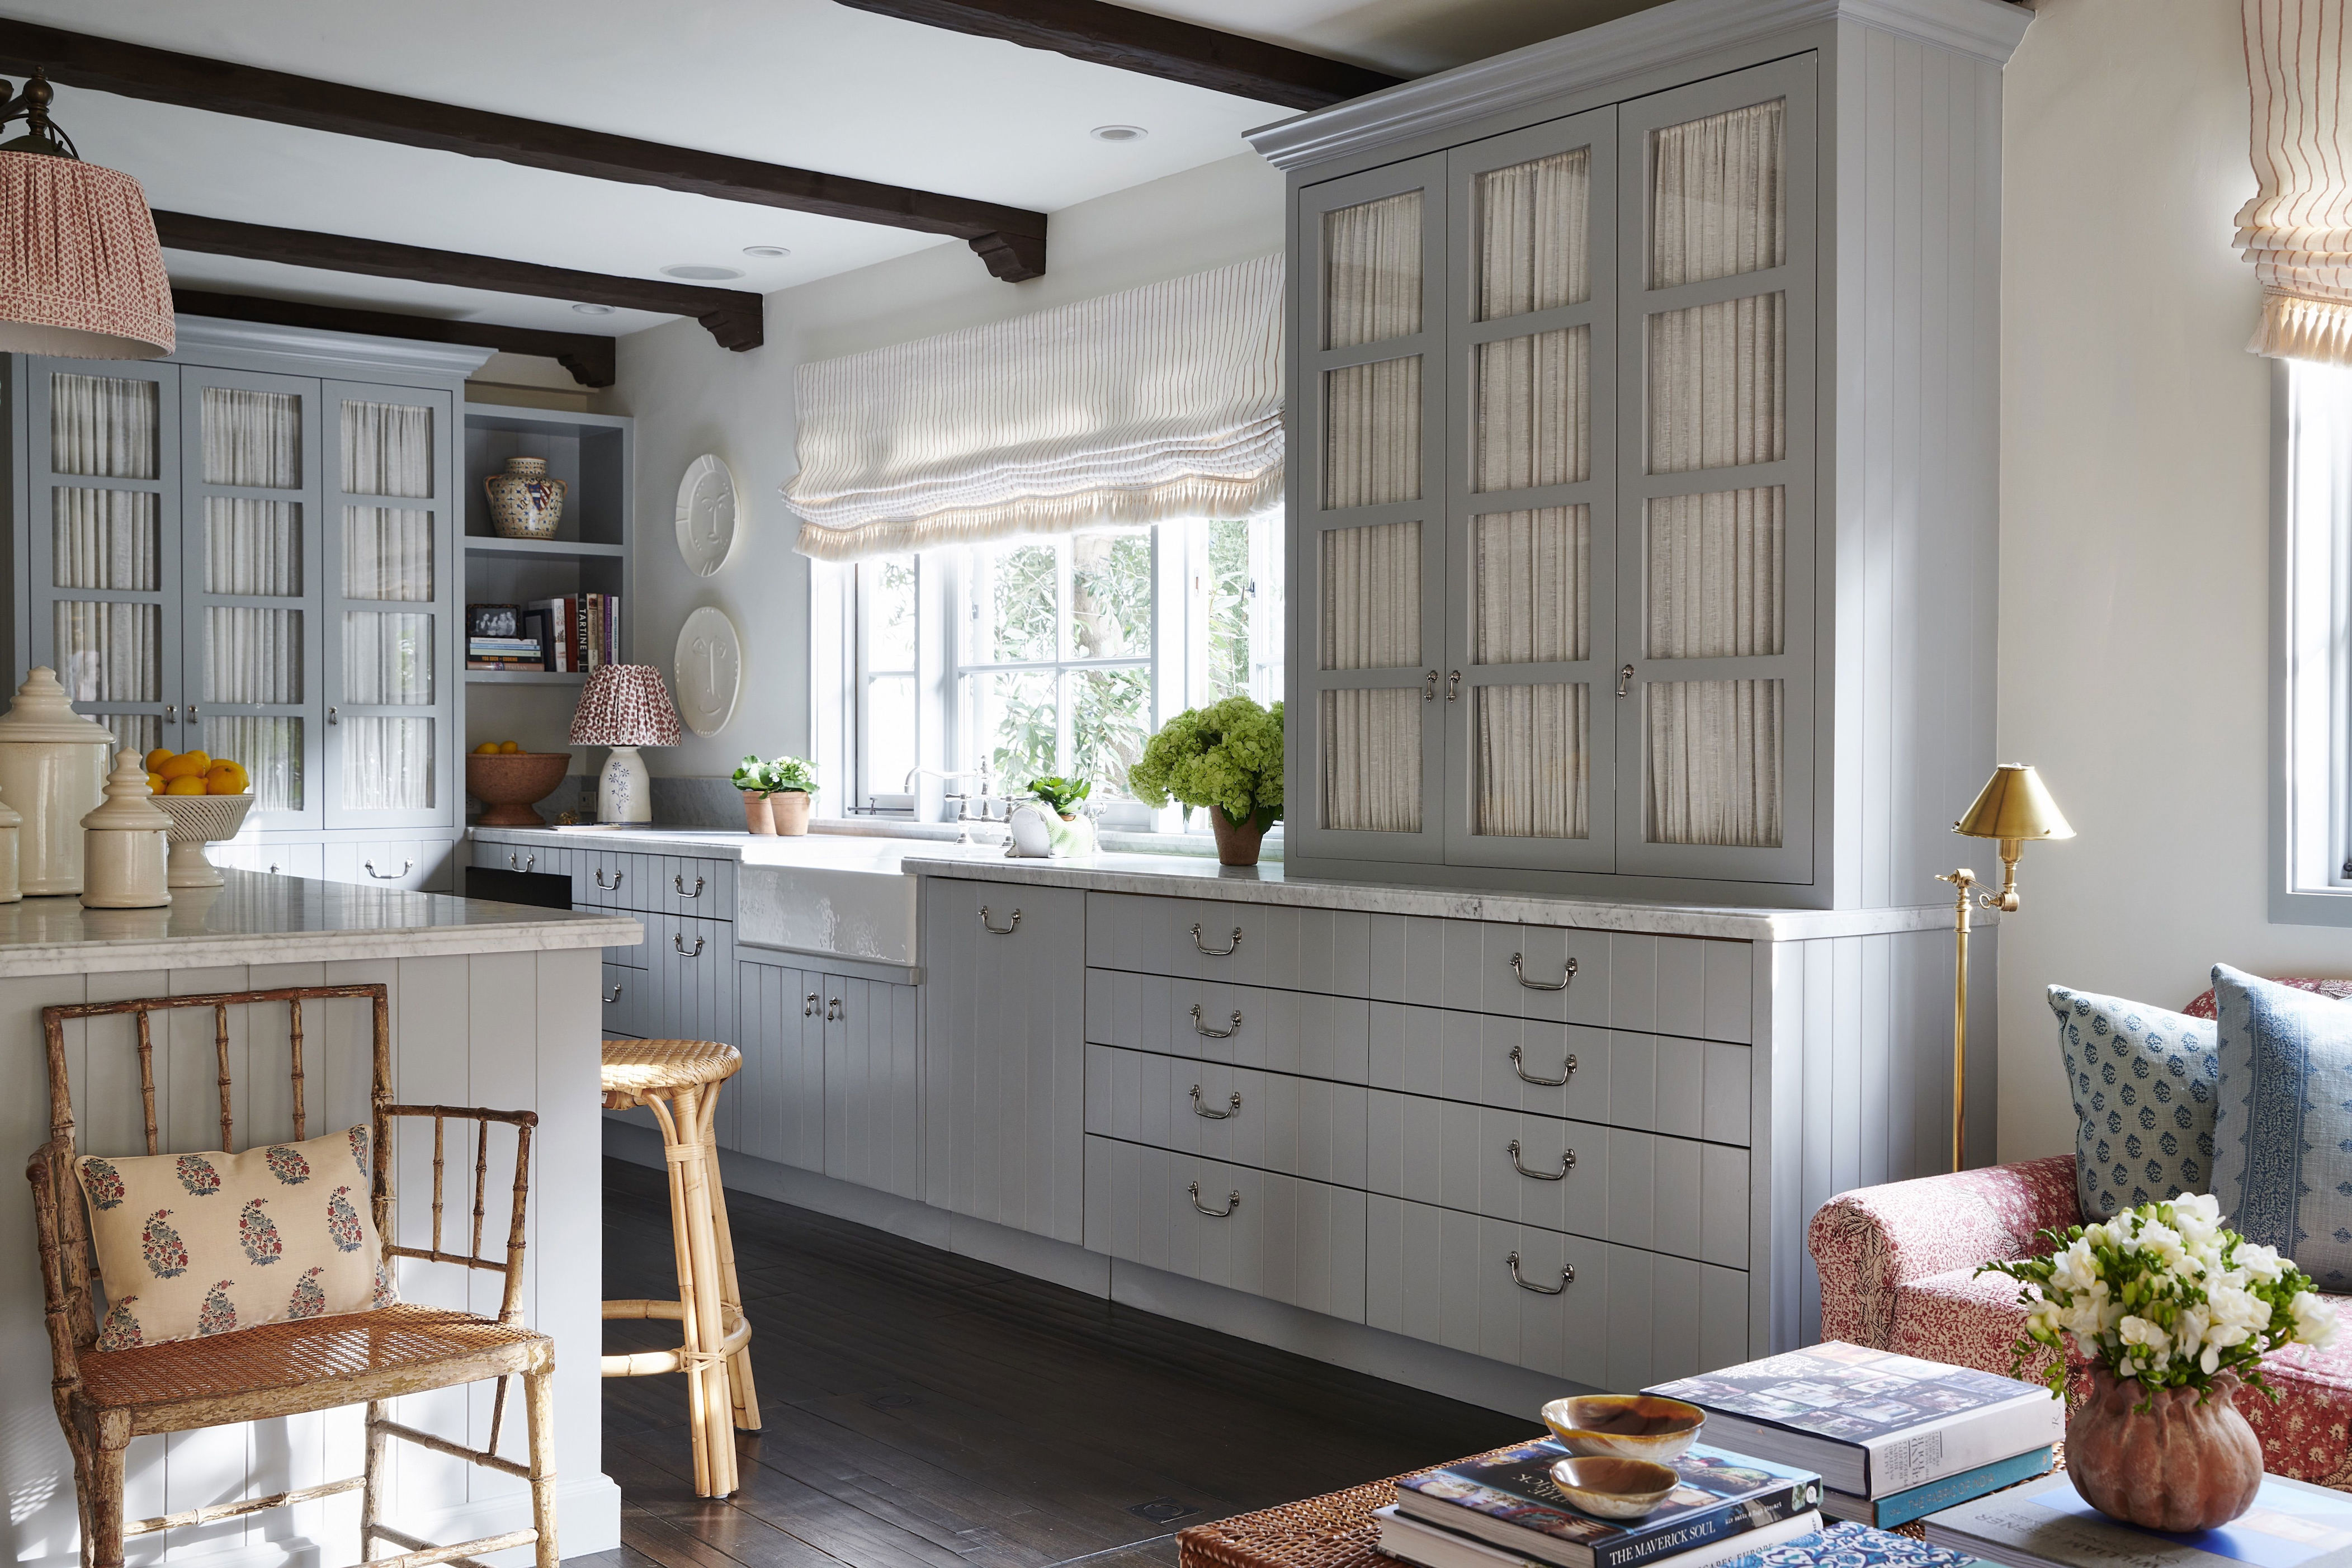 These Beautiful Kitchen Cabinet Designs Are Sure to Make a Statement